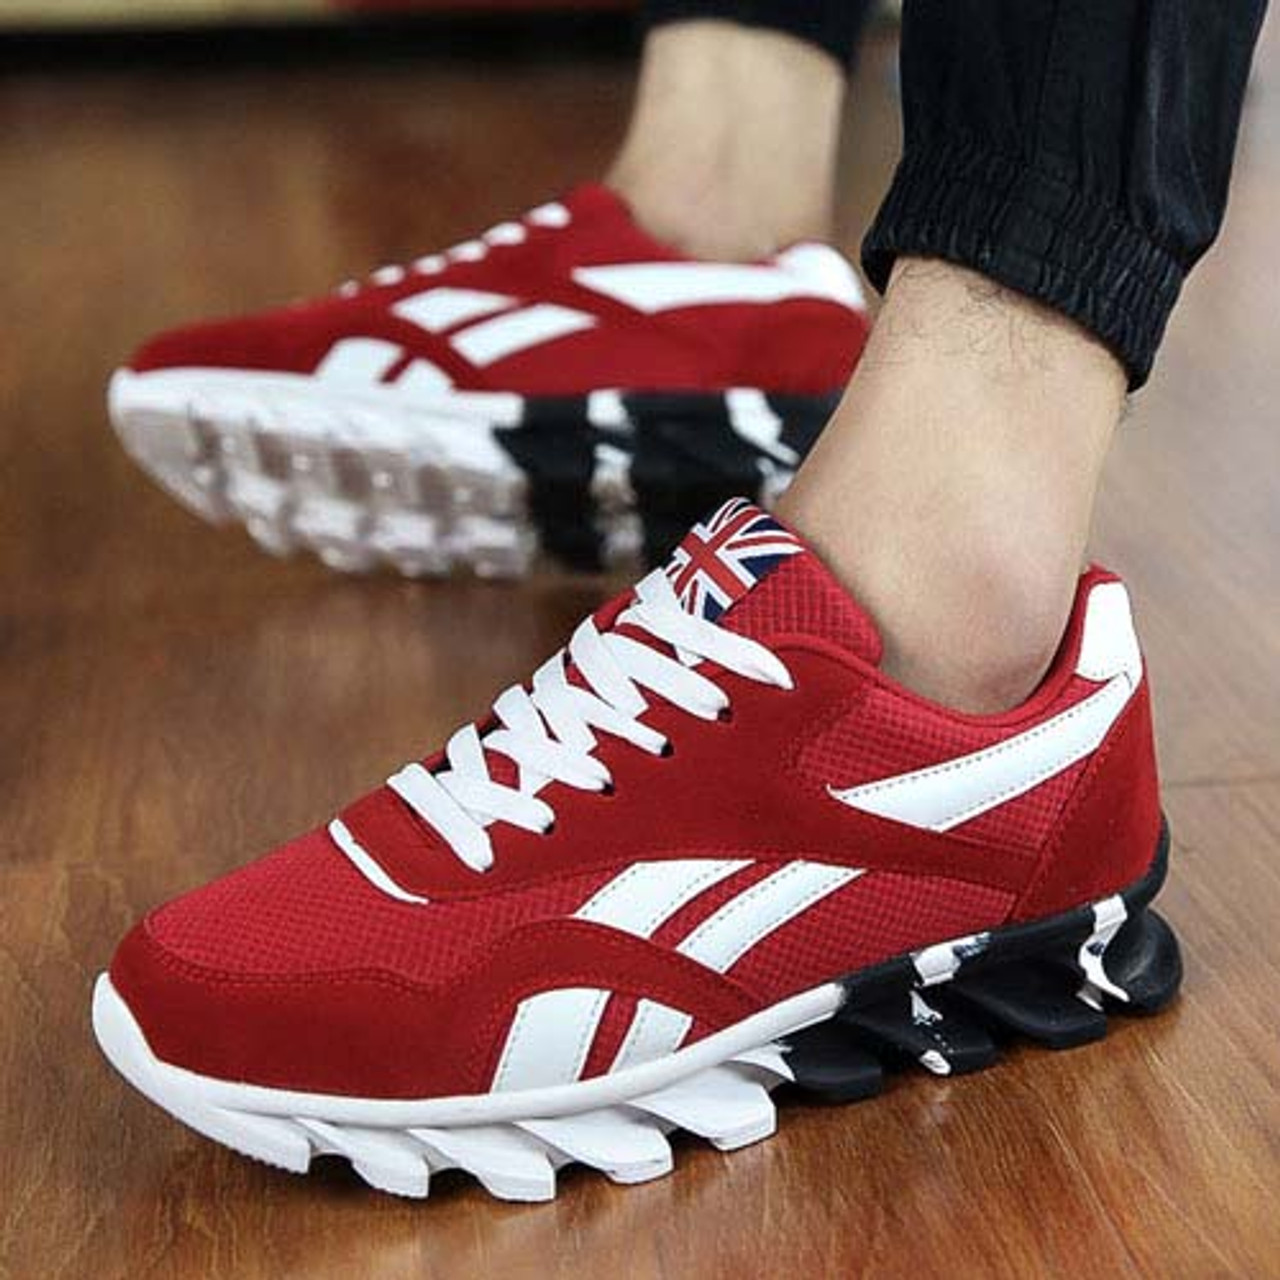 Red pattern flag print leather lace up shoe sneaker | Mens shoes online ...